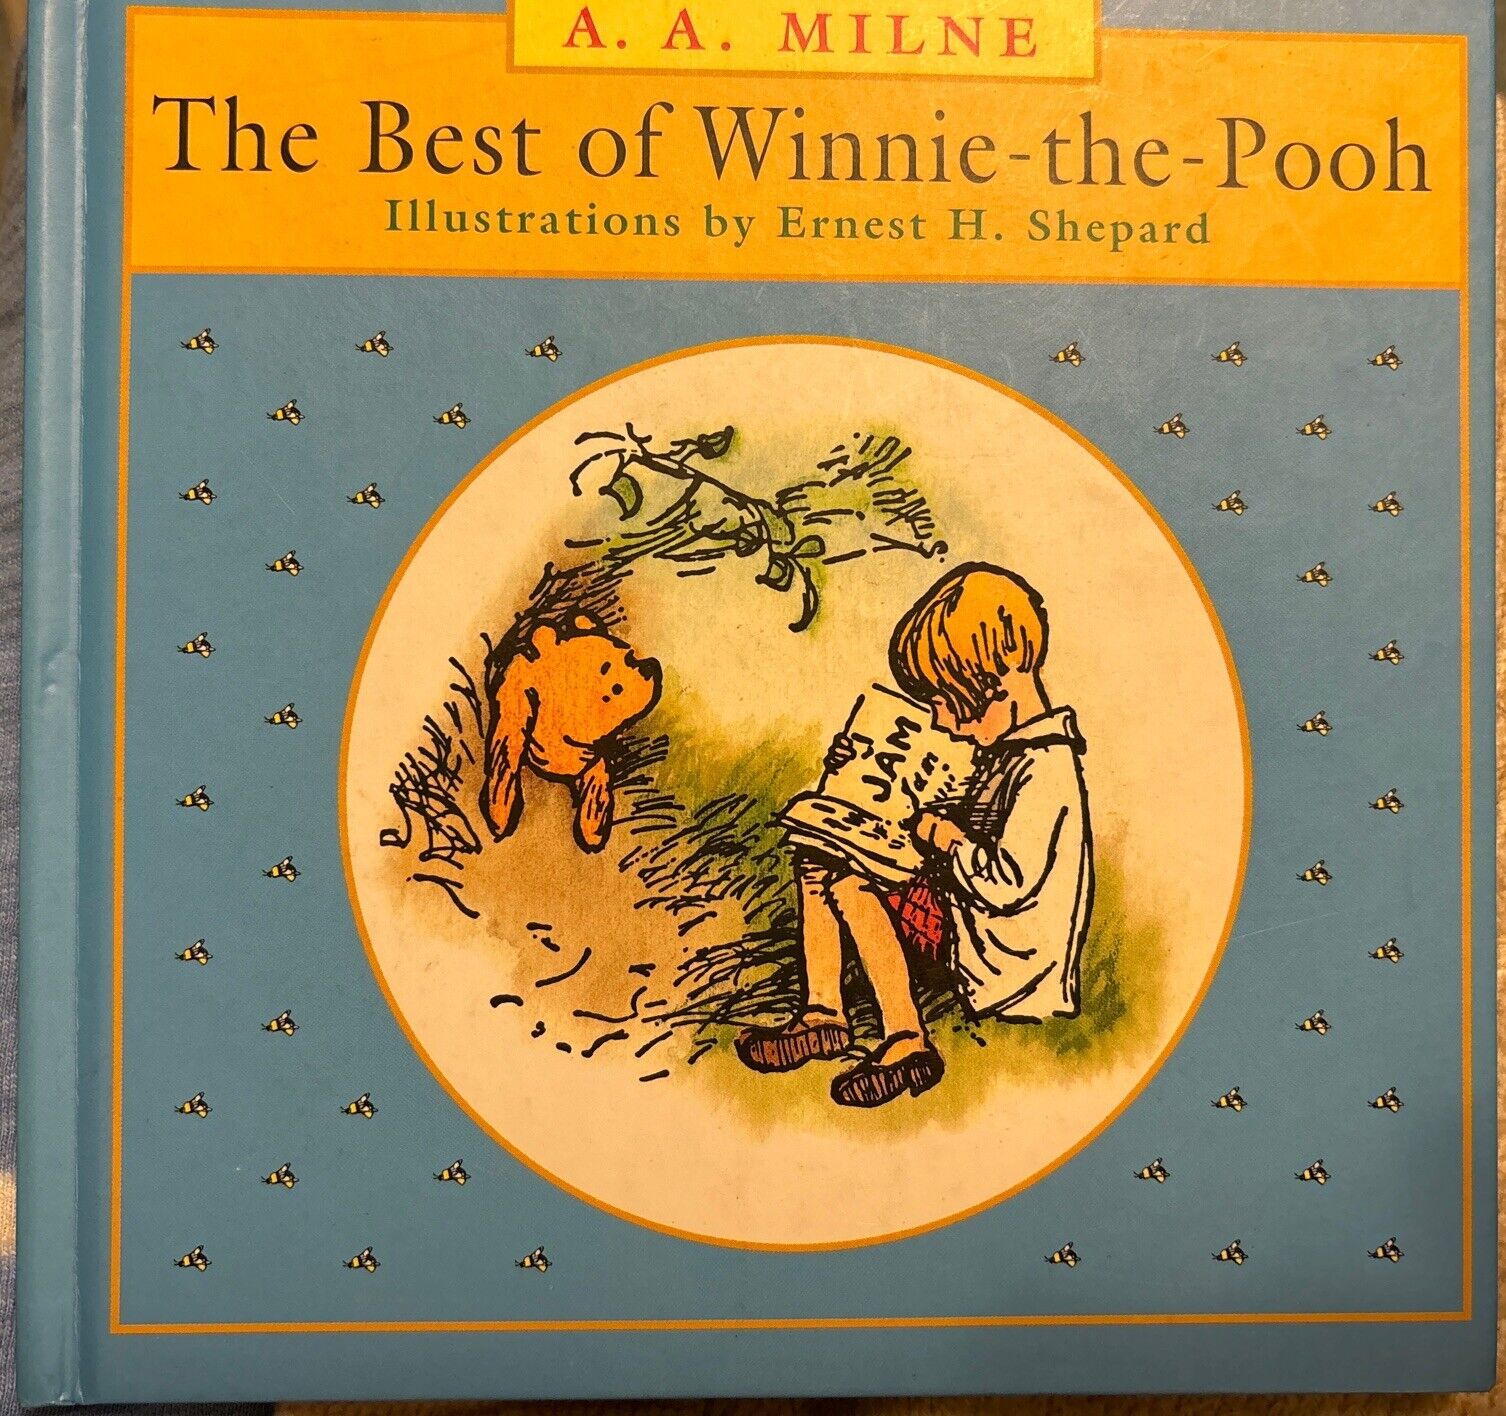 The Best of Winnie-the-Pooh - A Gift Book and CD